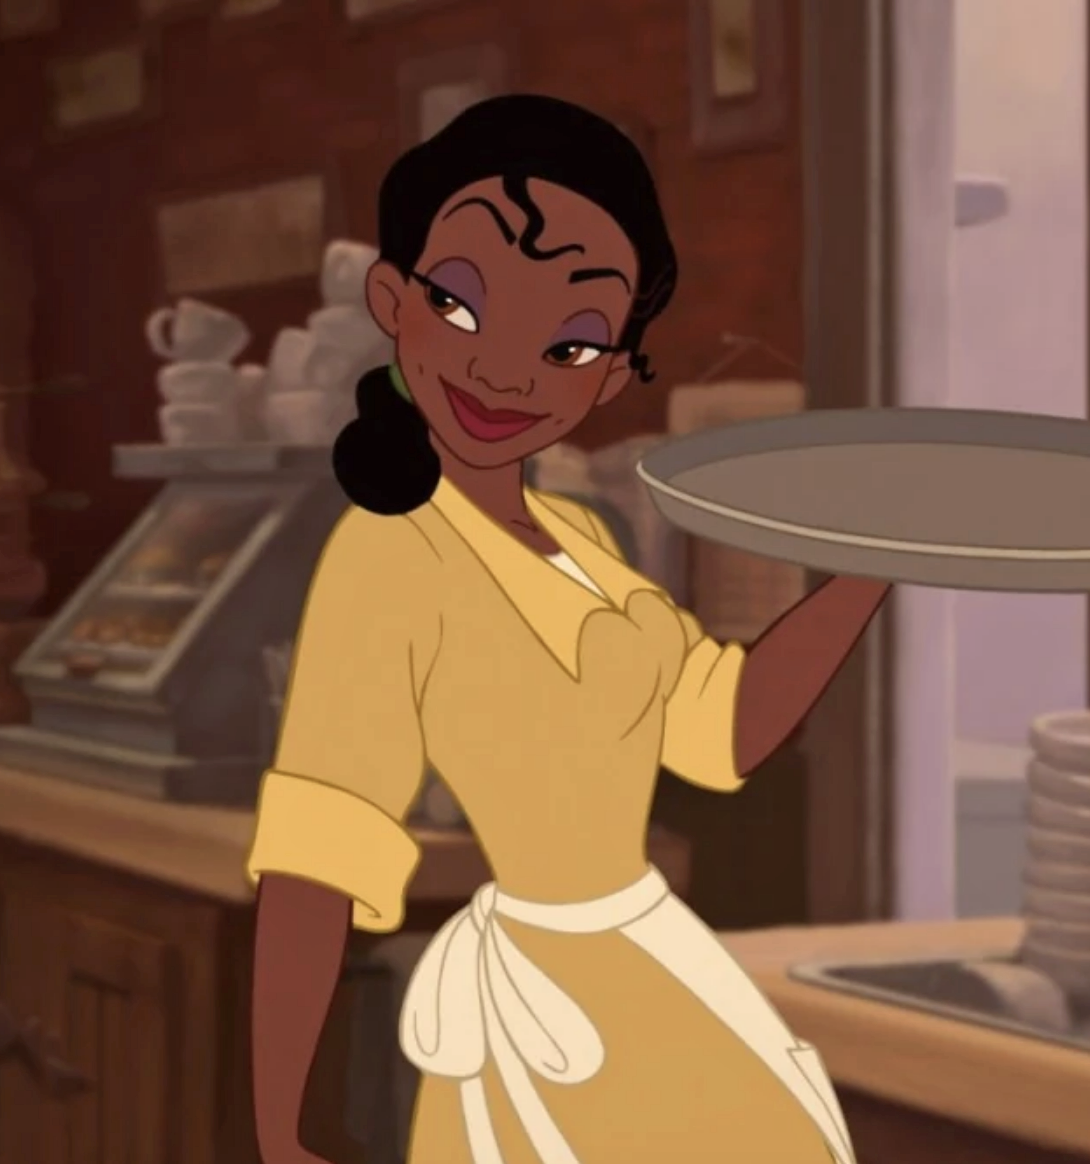 Tiana in her restaurant in the movie